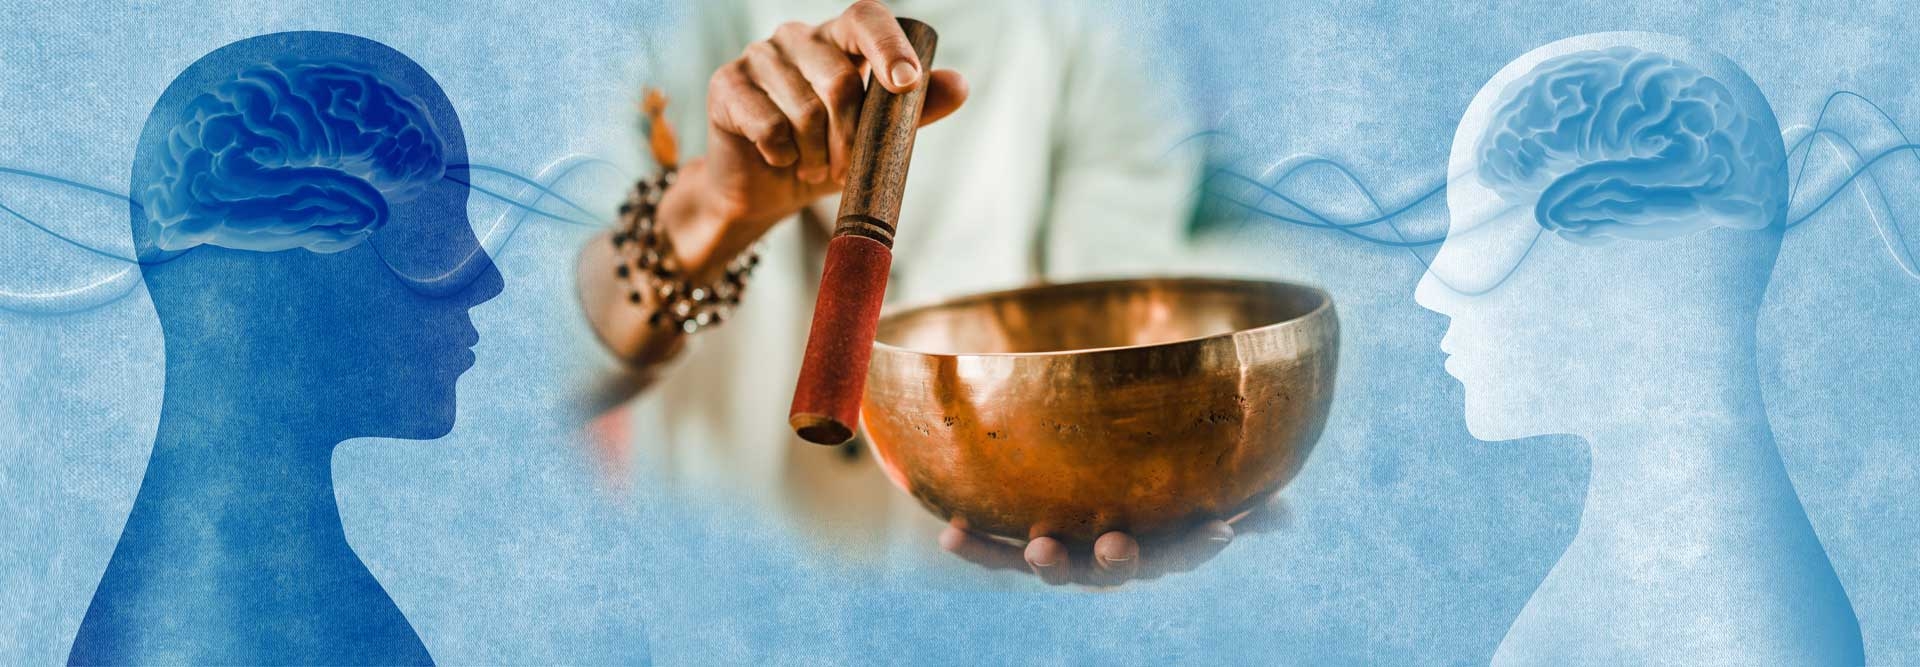 Exploring The Body - Mind - Connection Using Sound Healing Therapy